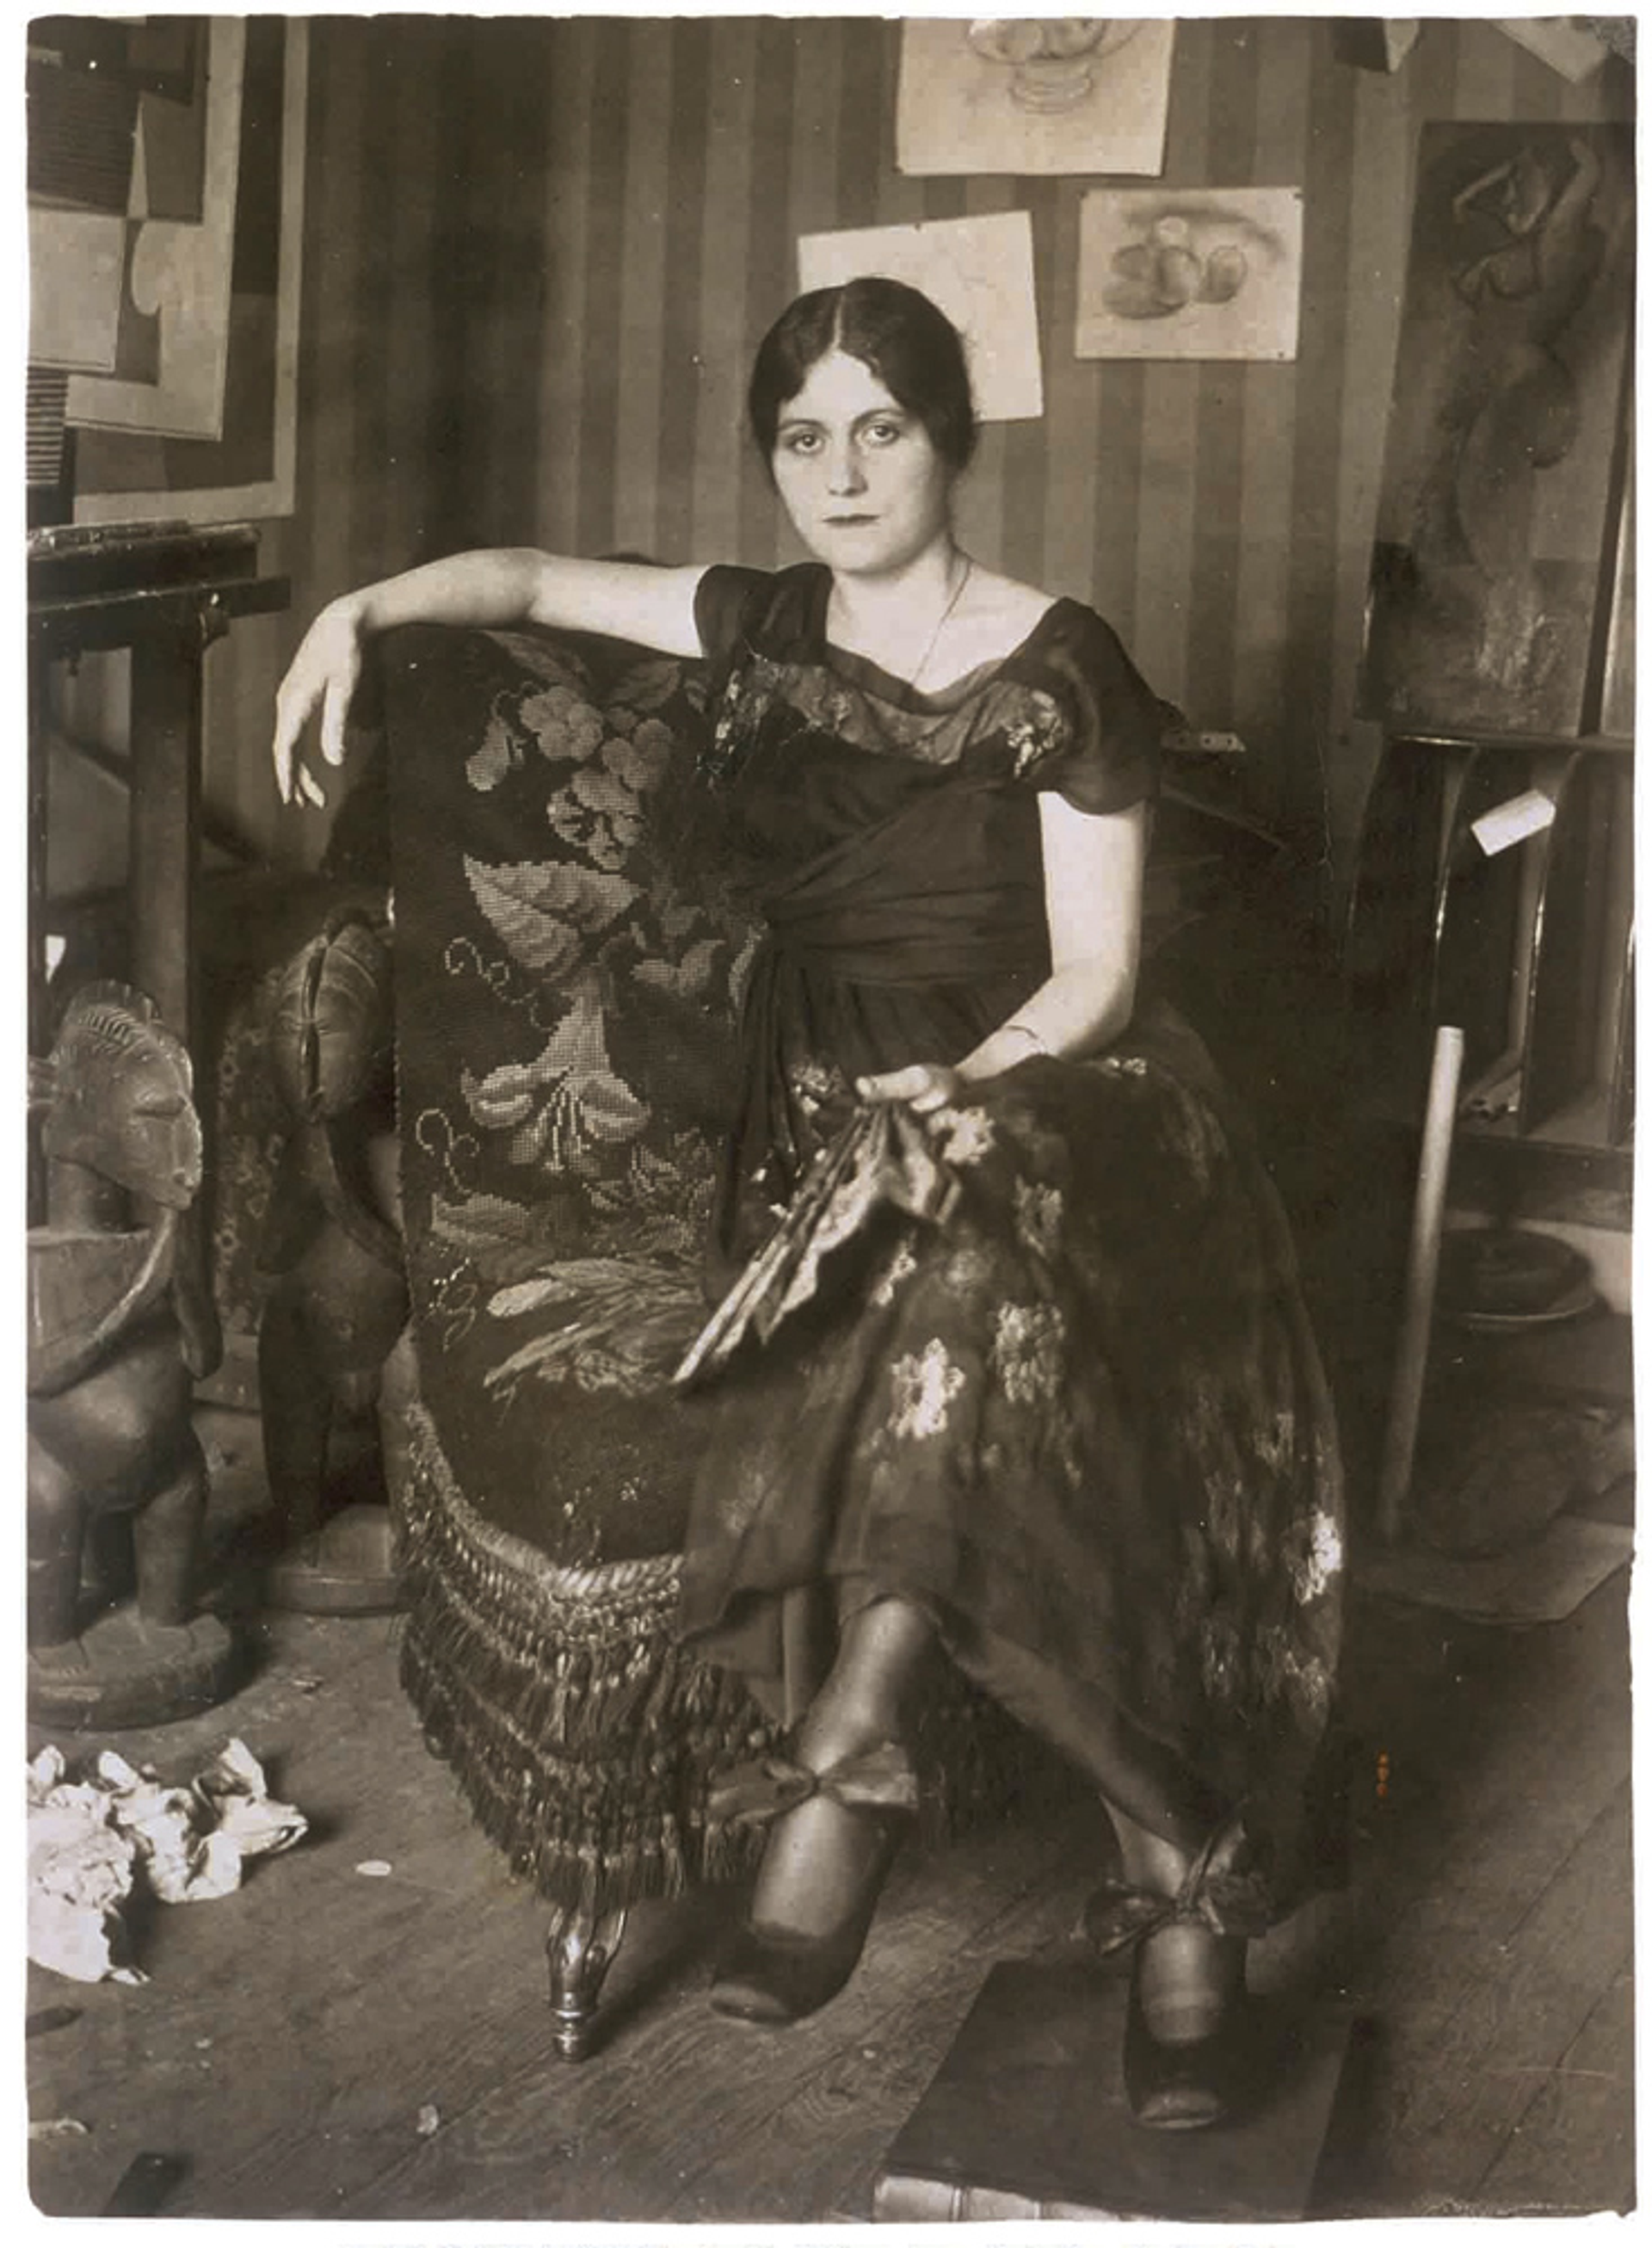 A black-and-white photograph of Olga Khokhlova in Picasso's Montrouge studio. She is shown sitting with her legs crossed while holding a fan.